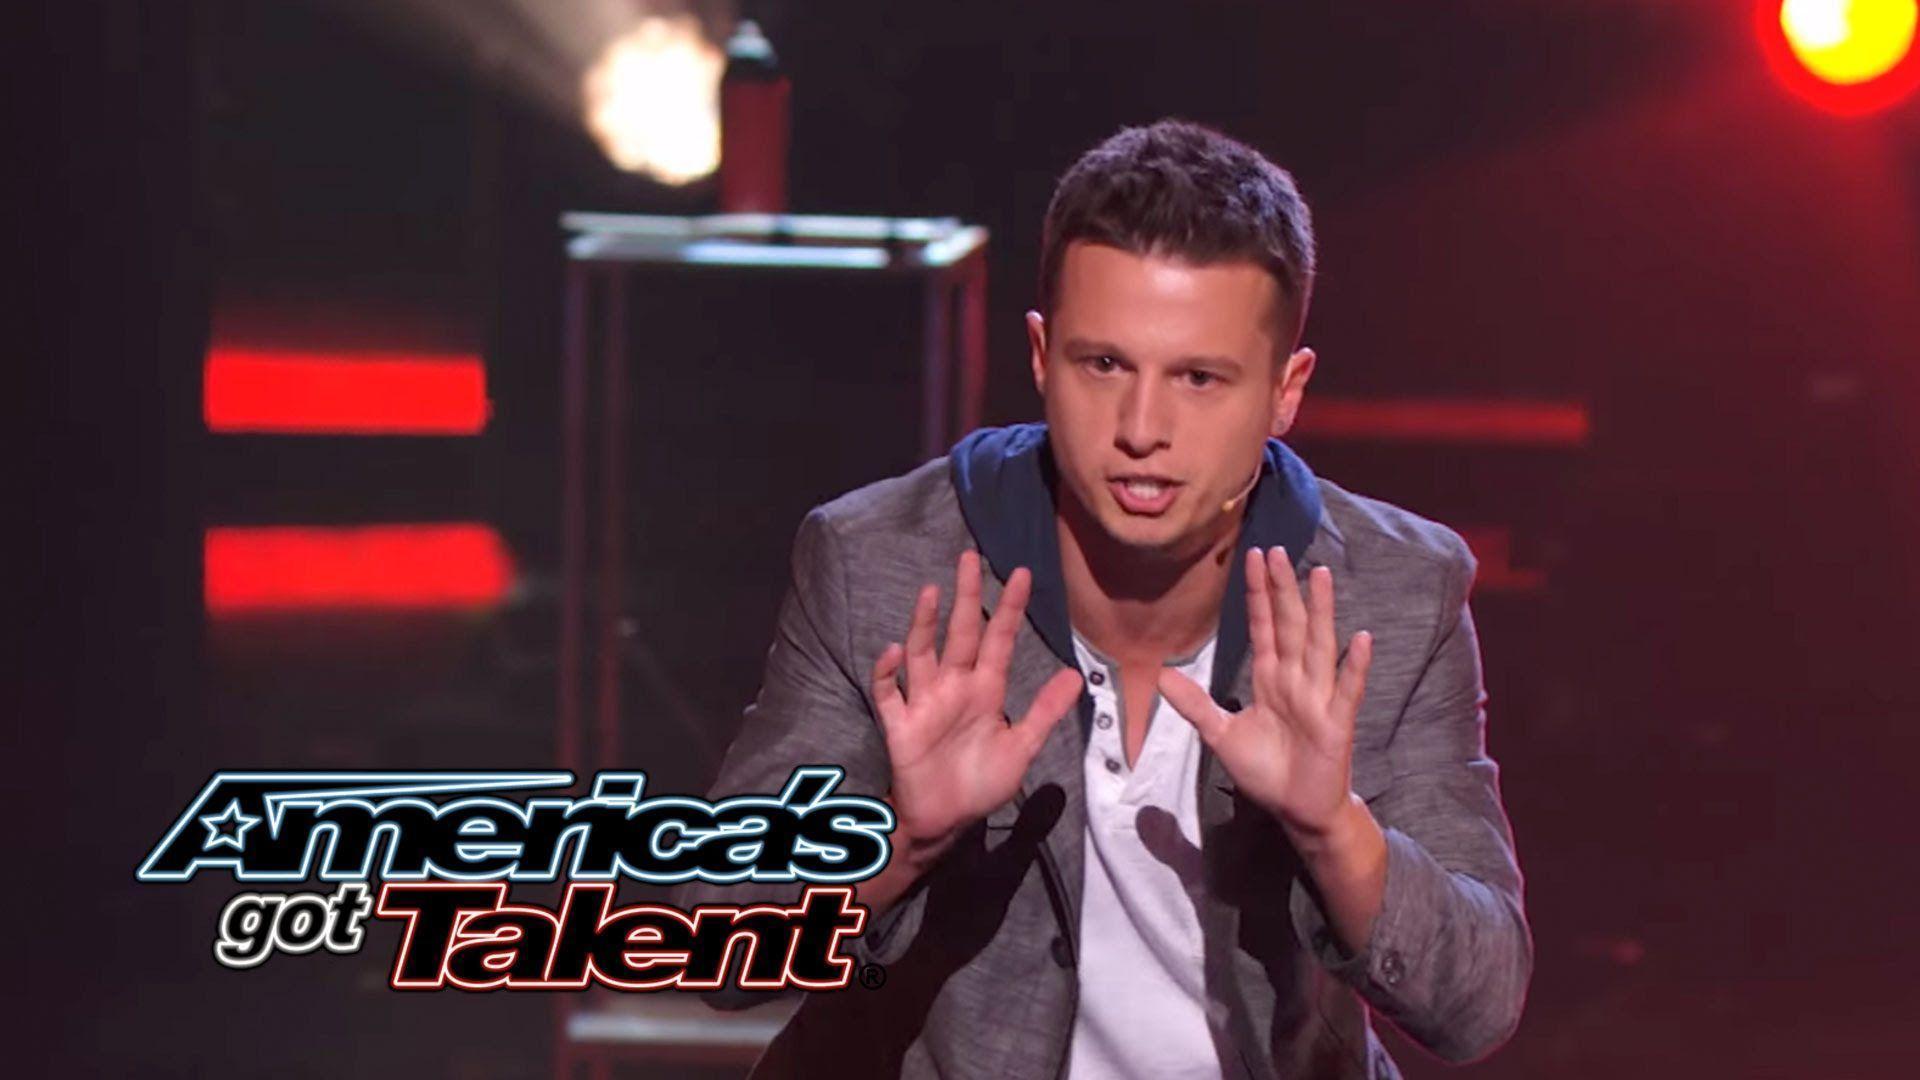 Mat Franco: Magician Uses Fire to Reveal Card Trick's